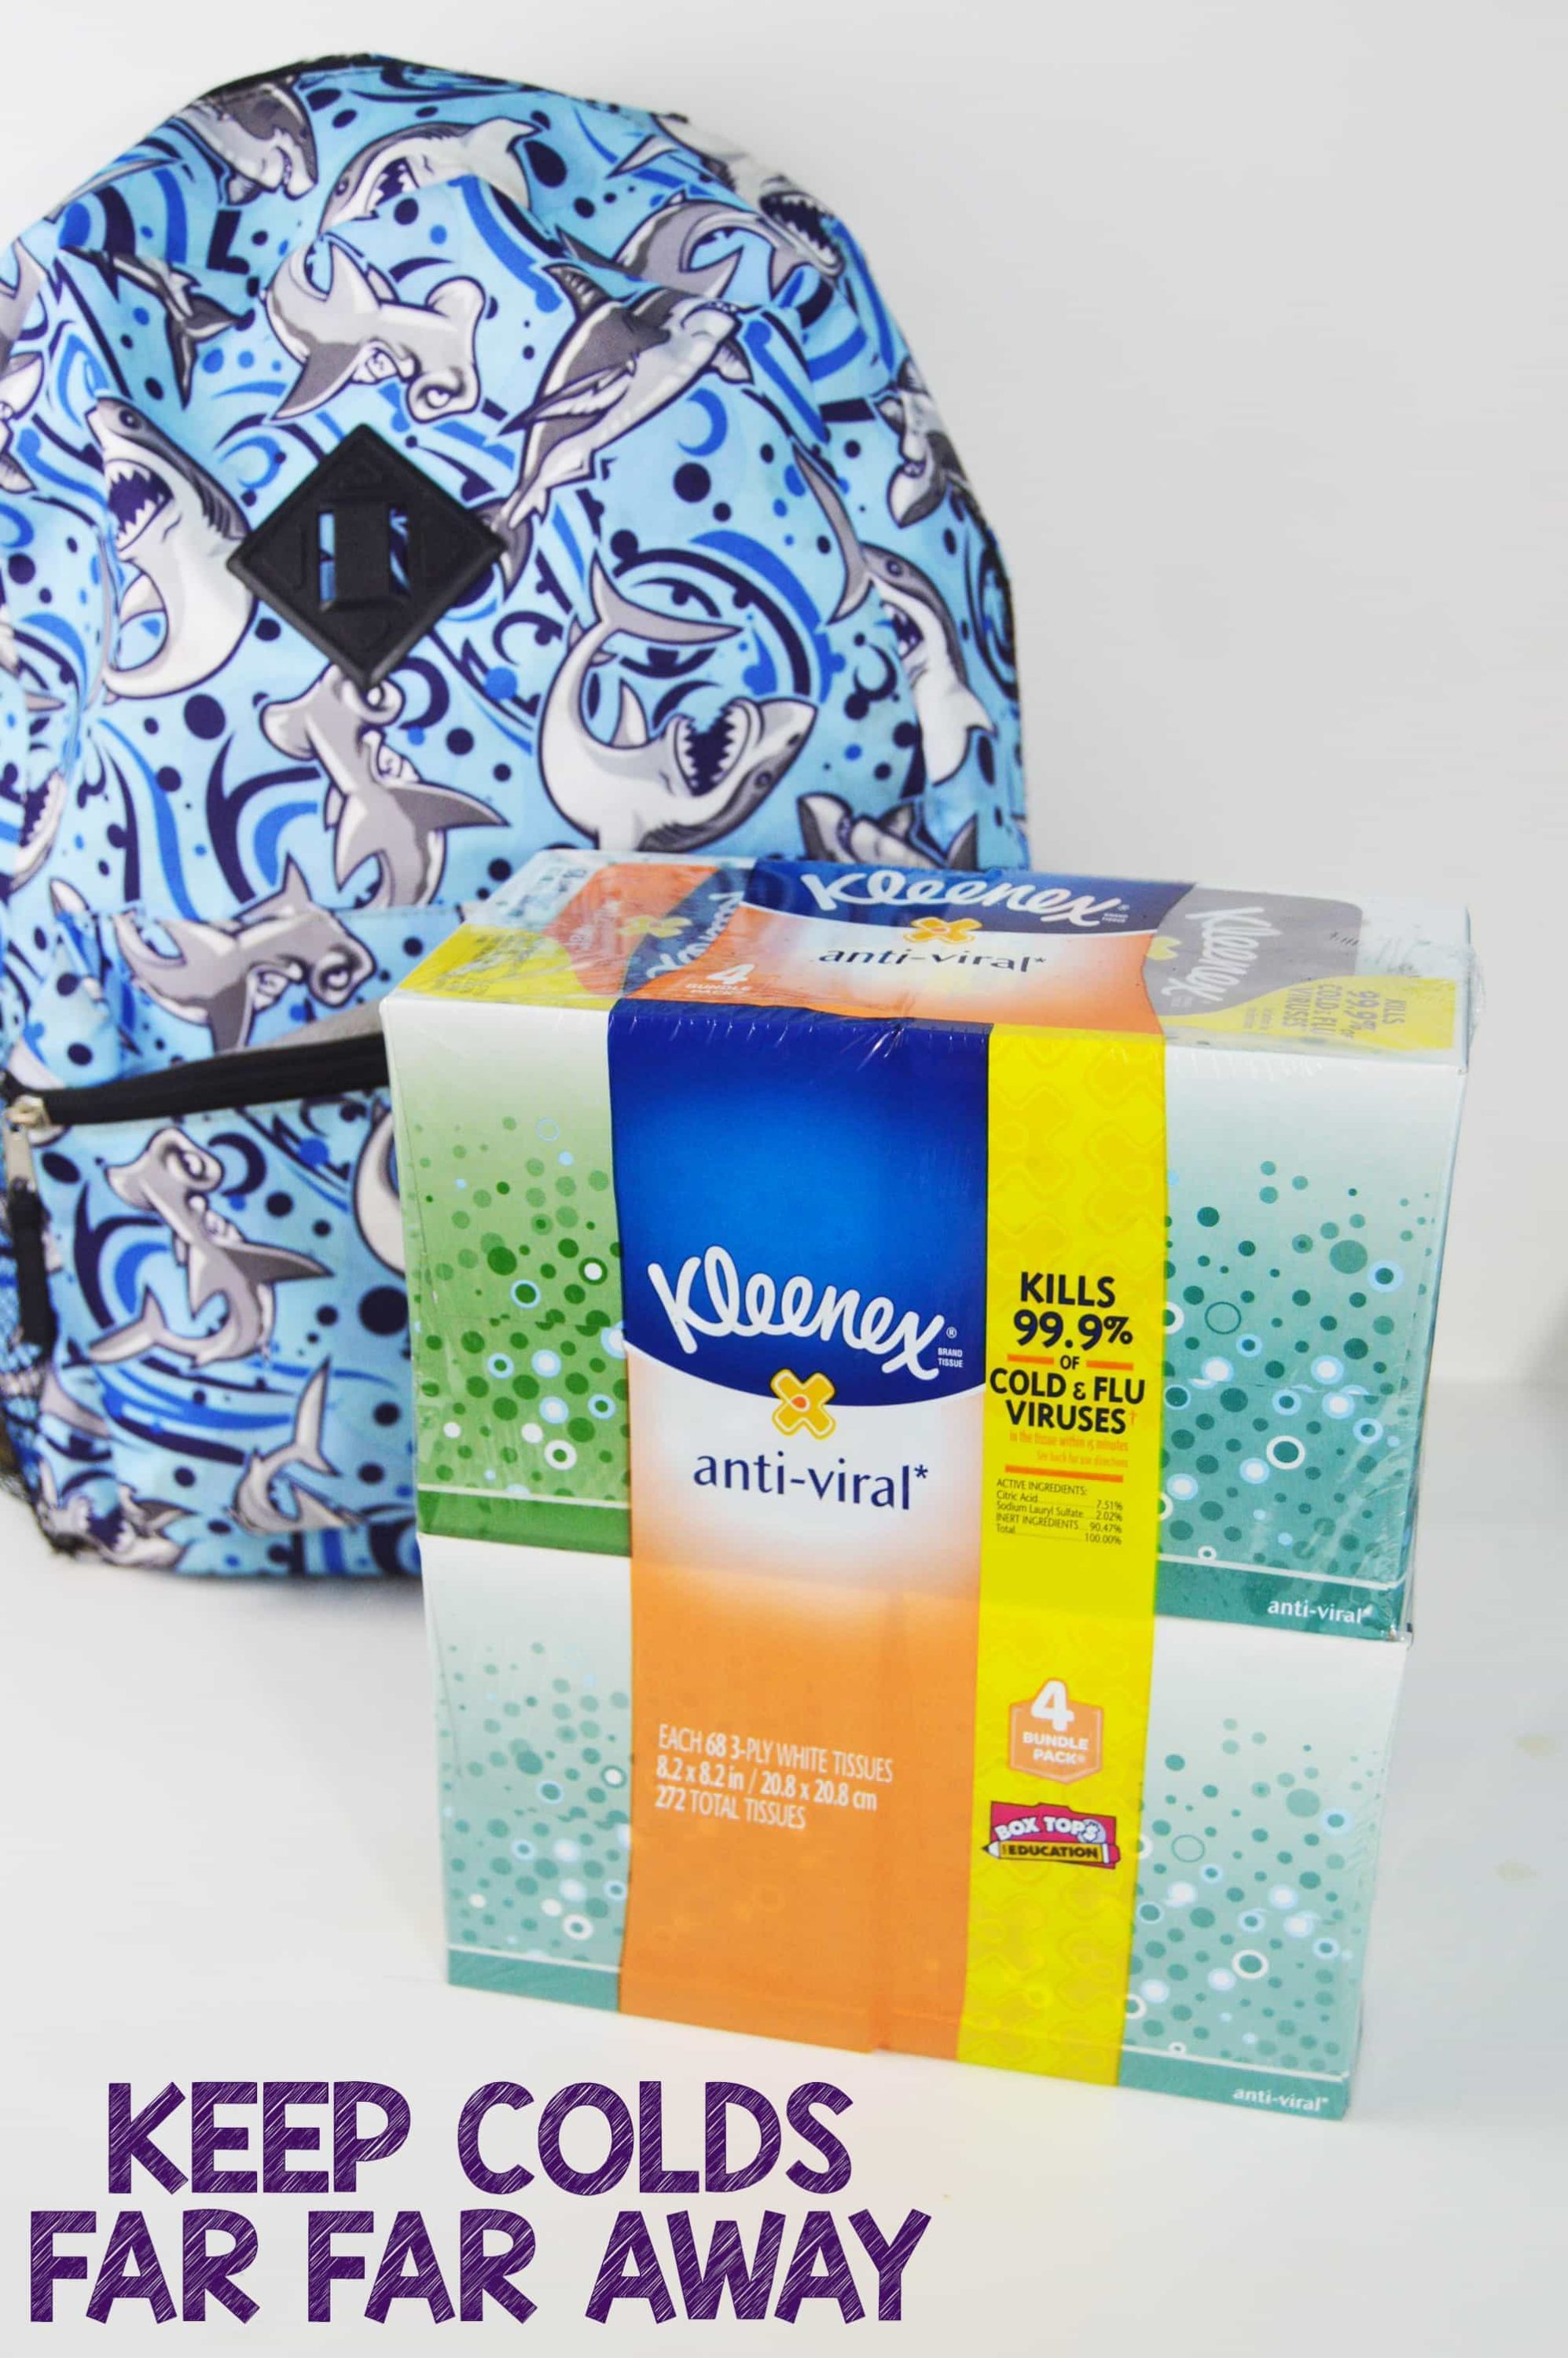 Be A Cold Hero At Home And School With Kleenex Anti-viral (available At Walmart)